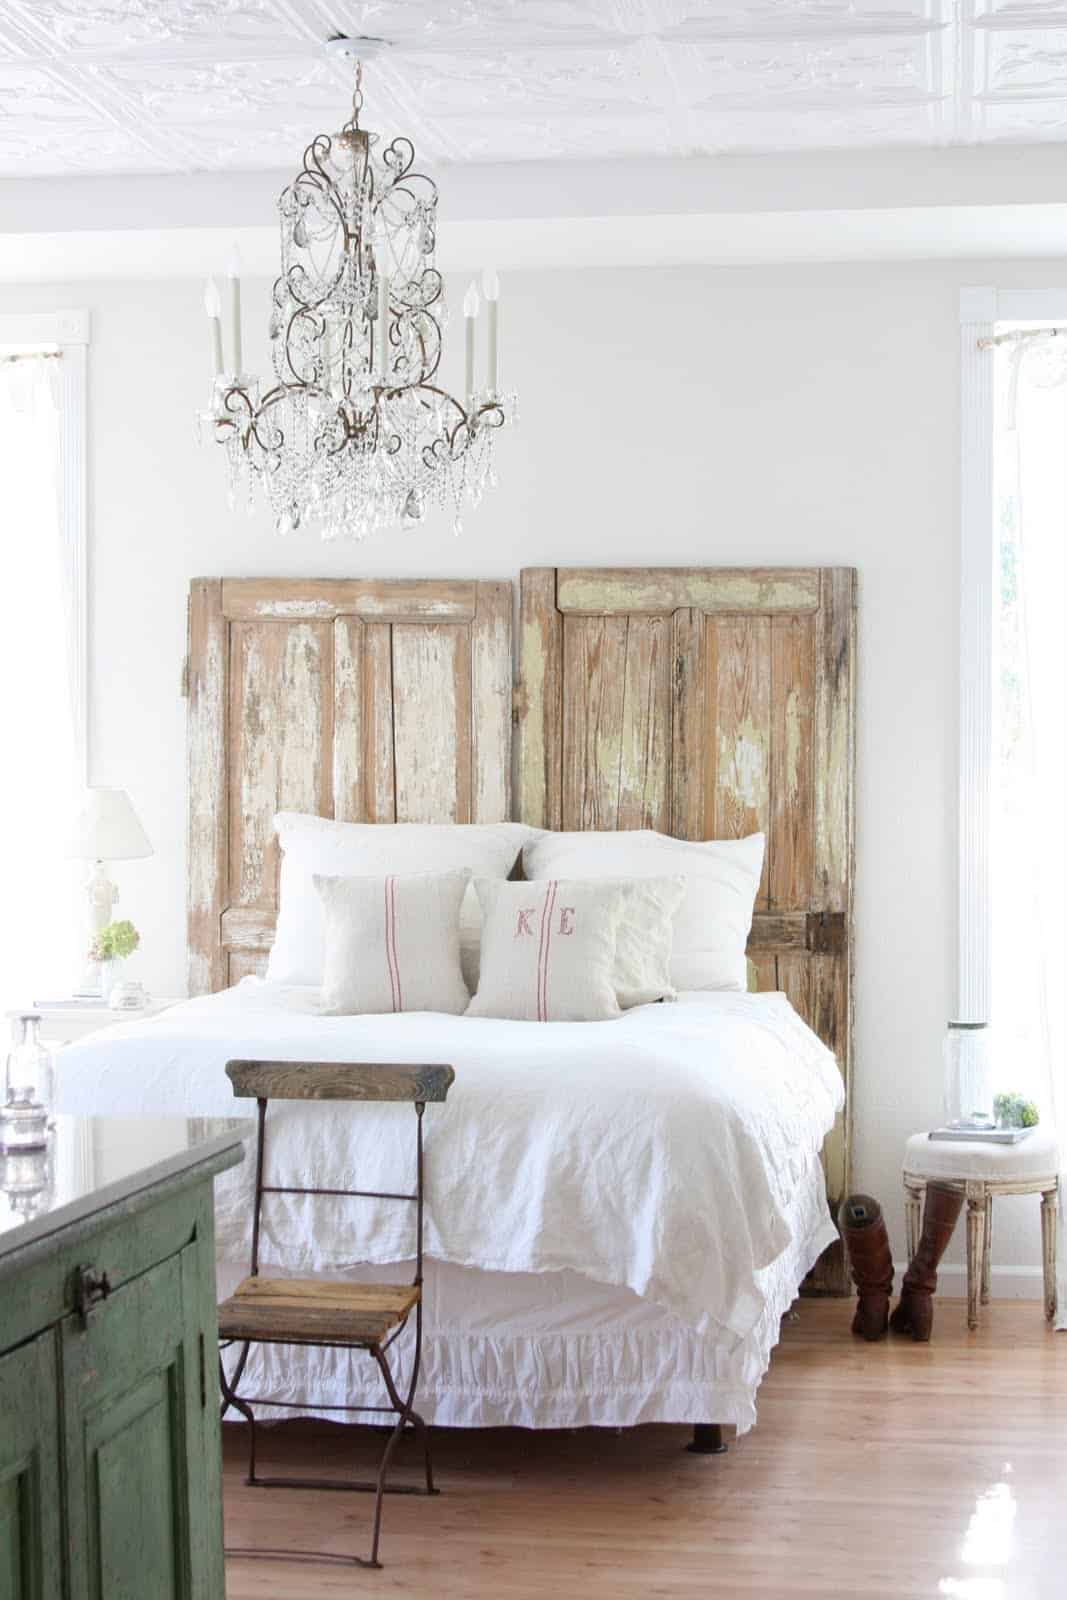  If you decide to have an aged headboard you may decide on going the DIY route.